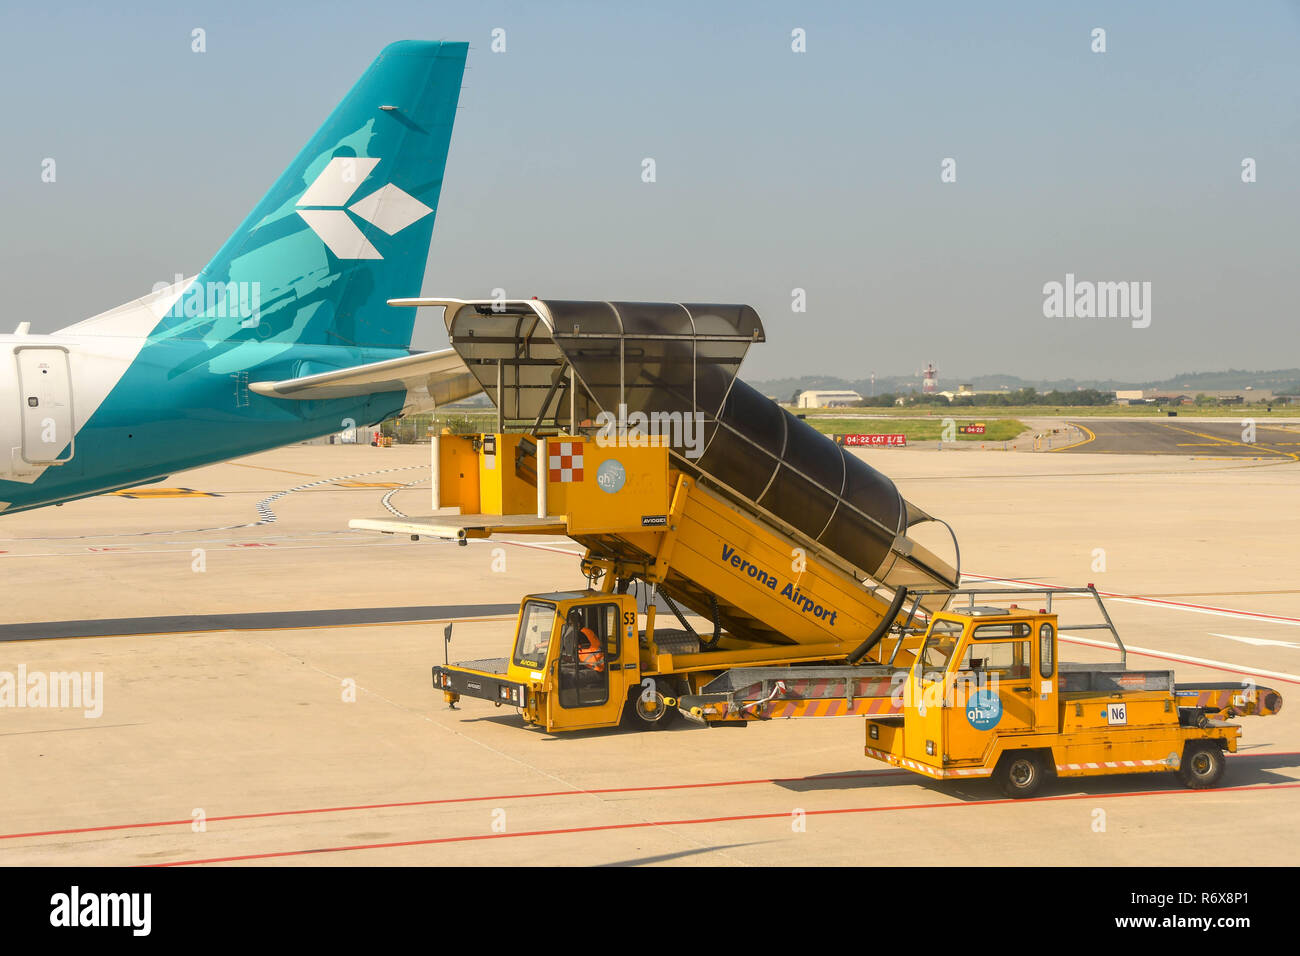 Ground handling equipment including luggage loader vehicles at Verona airport, Italy Stock Photo